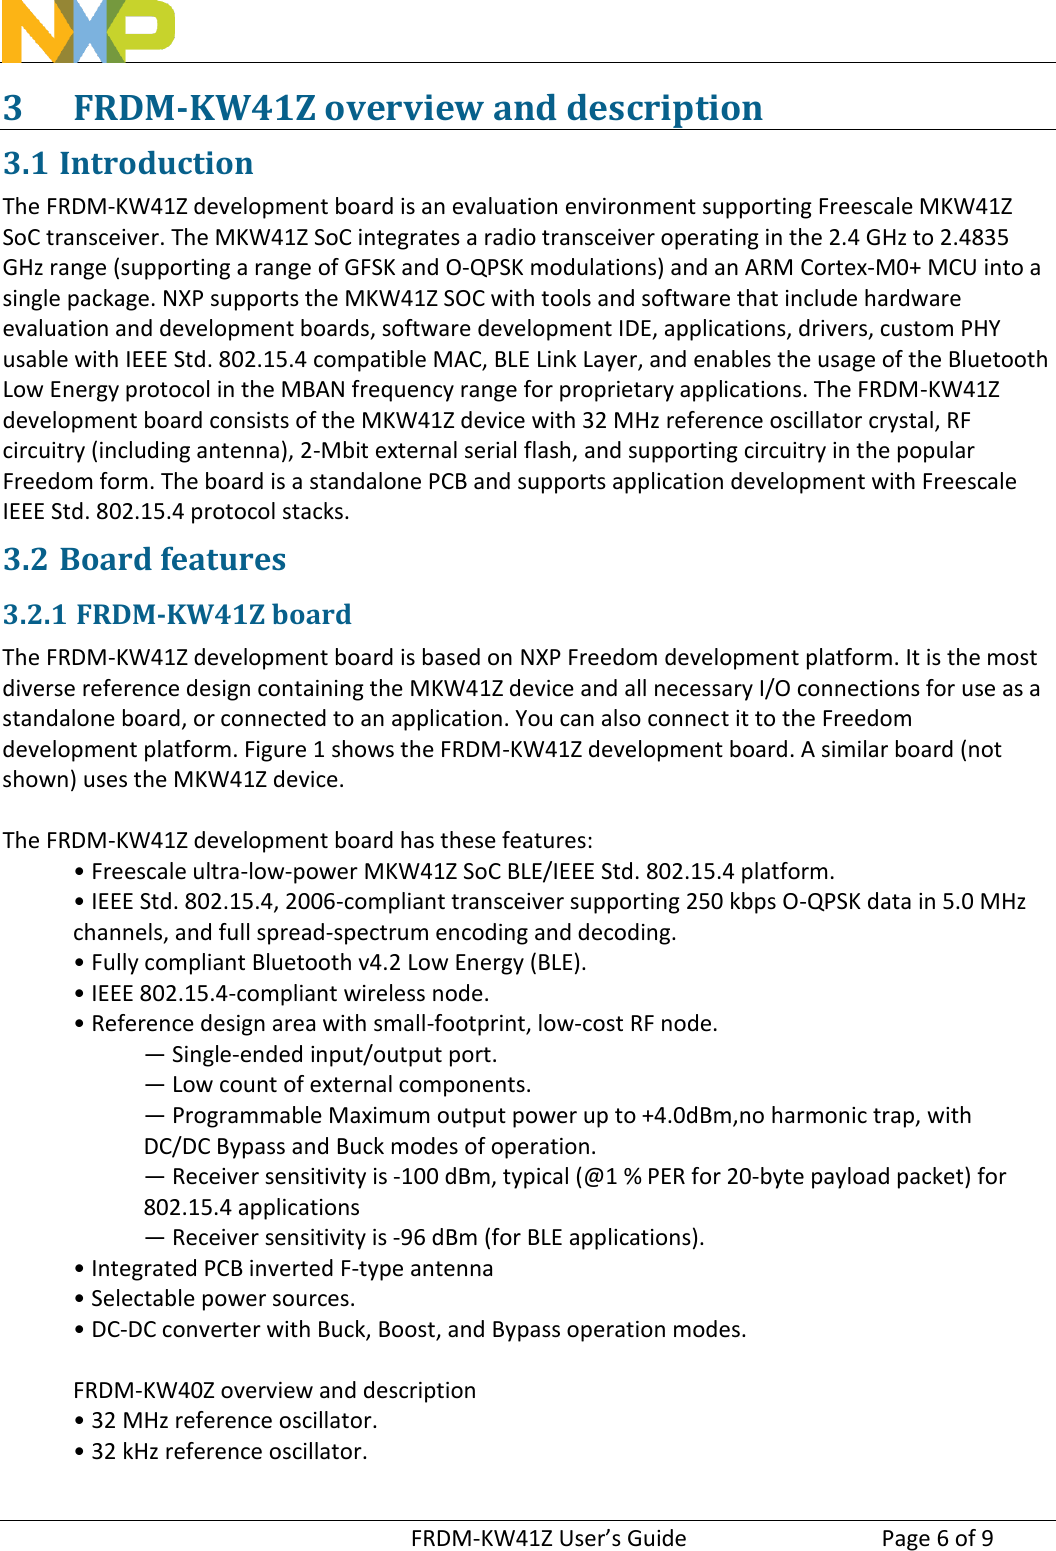 FRDM-KW41Z User’s Guide  Page 6 of 93 FRDM-KW41Z overview and description 3.1 Introduction The FRDM-KW41Z development board is an evaluation environment supporting Freescale MKW41Z SoC transceiver. The MKW41Z SoC integrates a radio transceiver operating in the 2.4 GHz to 2.4835 GHz range (supporting a range of GFSK and O-QPSK modulations) and an ARM Cortex-M0+ MCU into a single package. NXP supports the MKW41Z SOC with tools and software that include hardware evaluation and development boards, software development IDE, applications, drivers, custom PHY usable with IEEE Std. 802.15.4 compatible MAC, BLE Link Layer, and enables the usage of the Bluetooth Low Energy protocol in the MBAN frequency range for proprietary applications. The FRDM-KW41Z development board consists of the MKW41Z device with 32 MHz reference oscillator crystal, RF circuitry (including antenna), 2-Mbit external serial flash, and supporting circuitry in the popular Freedom form. The board is a standalone PCB and supports application development with Freescale IEEE Std. 802.15.4 protocol stacks. 3.2 Board features 3.2.1 FRDM-KW41Z board The FRDM-KW41Z development board is based on NXP Freedom development platform. It is the most diverse reference design containing the MKW41Z device and all necessary I/O connections for use as a standalone board, or connected to an application. You can also connect it to the Freedom development platform. Figure 1 shows the FRDM-KW41Z development board. A similar board (not shown) uses the MKW41Z device. The FRDM-KW41Z development board has these features: • Freescale ultra-low-power MKW41Z SoC BLE/IEEE Std. 802.15.4 platform.• IEEE Std. 802.15.4, 2006-compliant transceiver supporting 250 kbps O-QPSK data in 5.0 MHzchannels, and full spread-spectrum encoding and decoding. • Fully compliant Bluetooth v4.2 Low Energy (BLE).• IEEE 802.15.4-compliant wireless node.• Reference design area with small-footprint, low-cost RF node.— Single-ended input/output port.  — Low count of external components.  — Programmable Maximum output power up to +4.0dBm,no harmonic trap, with DC/DC Bypass and Buck modes of operation.  — Receiver sensitivity is -100 dBm, typical (@1 % PER for 20-byte payload packet) for 802.15.4 applications— Receiver sensitivity is -96 dBm (for BLE applications).  •Integrated PCB inverted F-type antenna• Selectable power sources.• DC-DC converter with Buck, Boost, and Bypass operation modes.FRDM-KW40Z overview and description • 32 MHz reference oscillator.• 32 kHz reference oscillator.